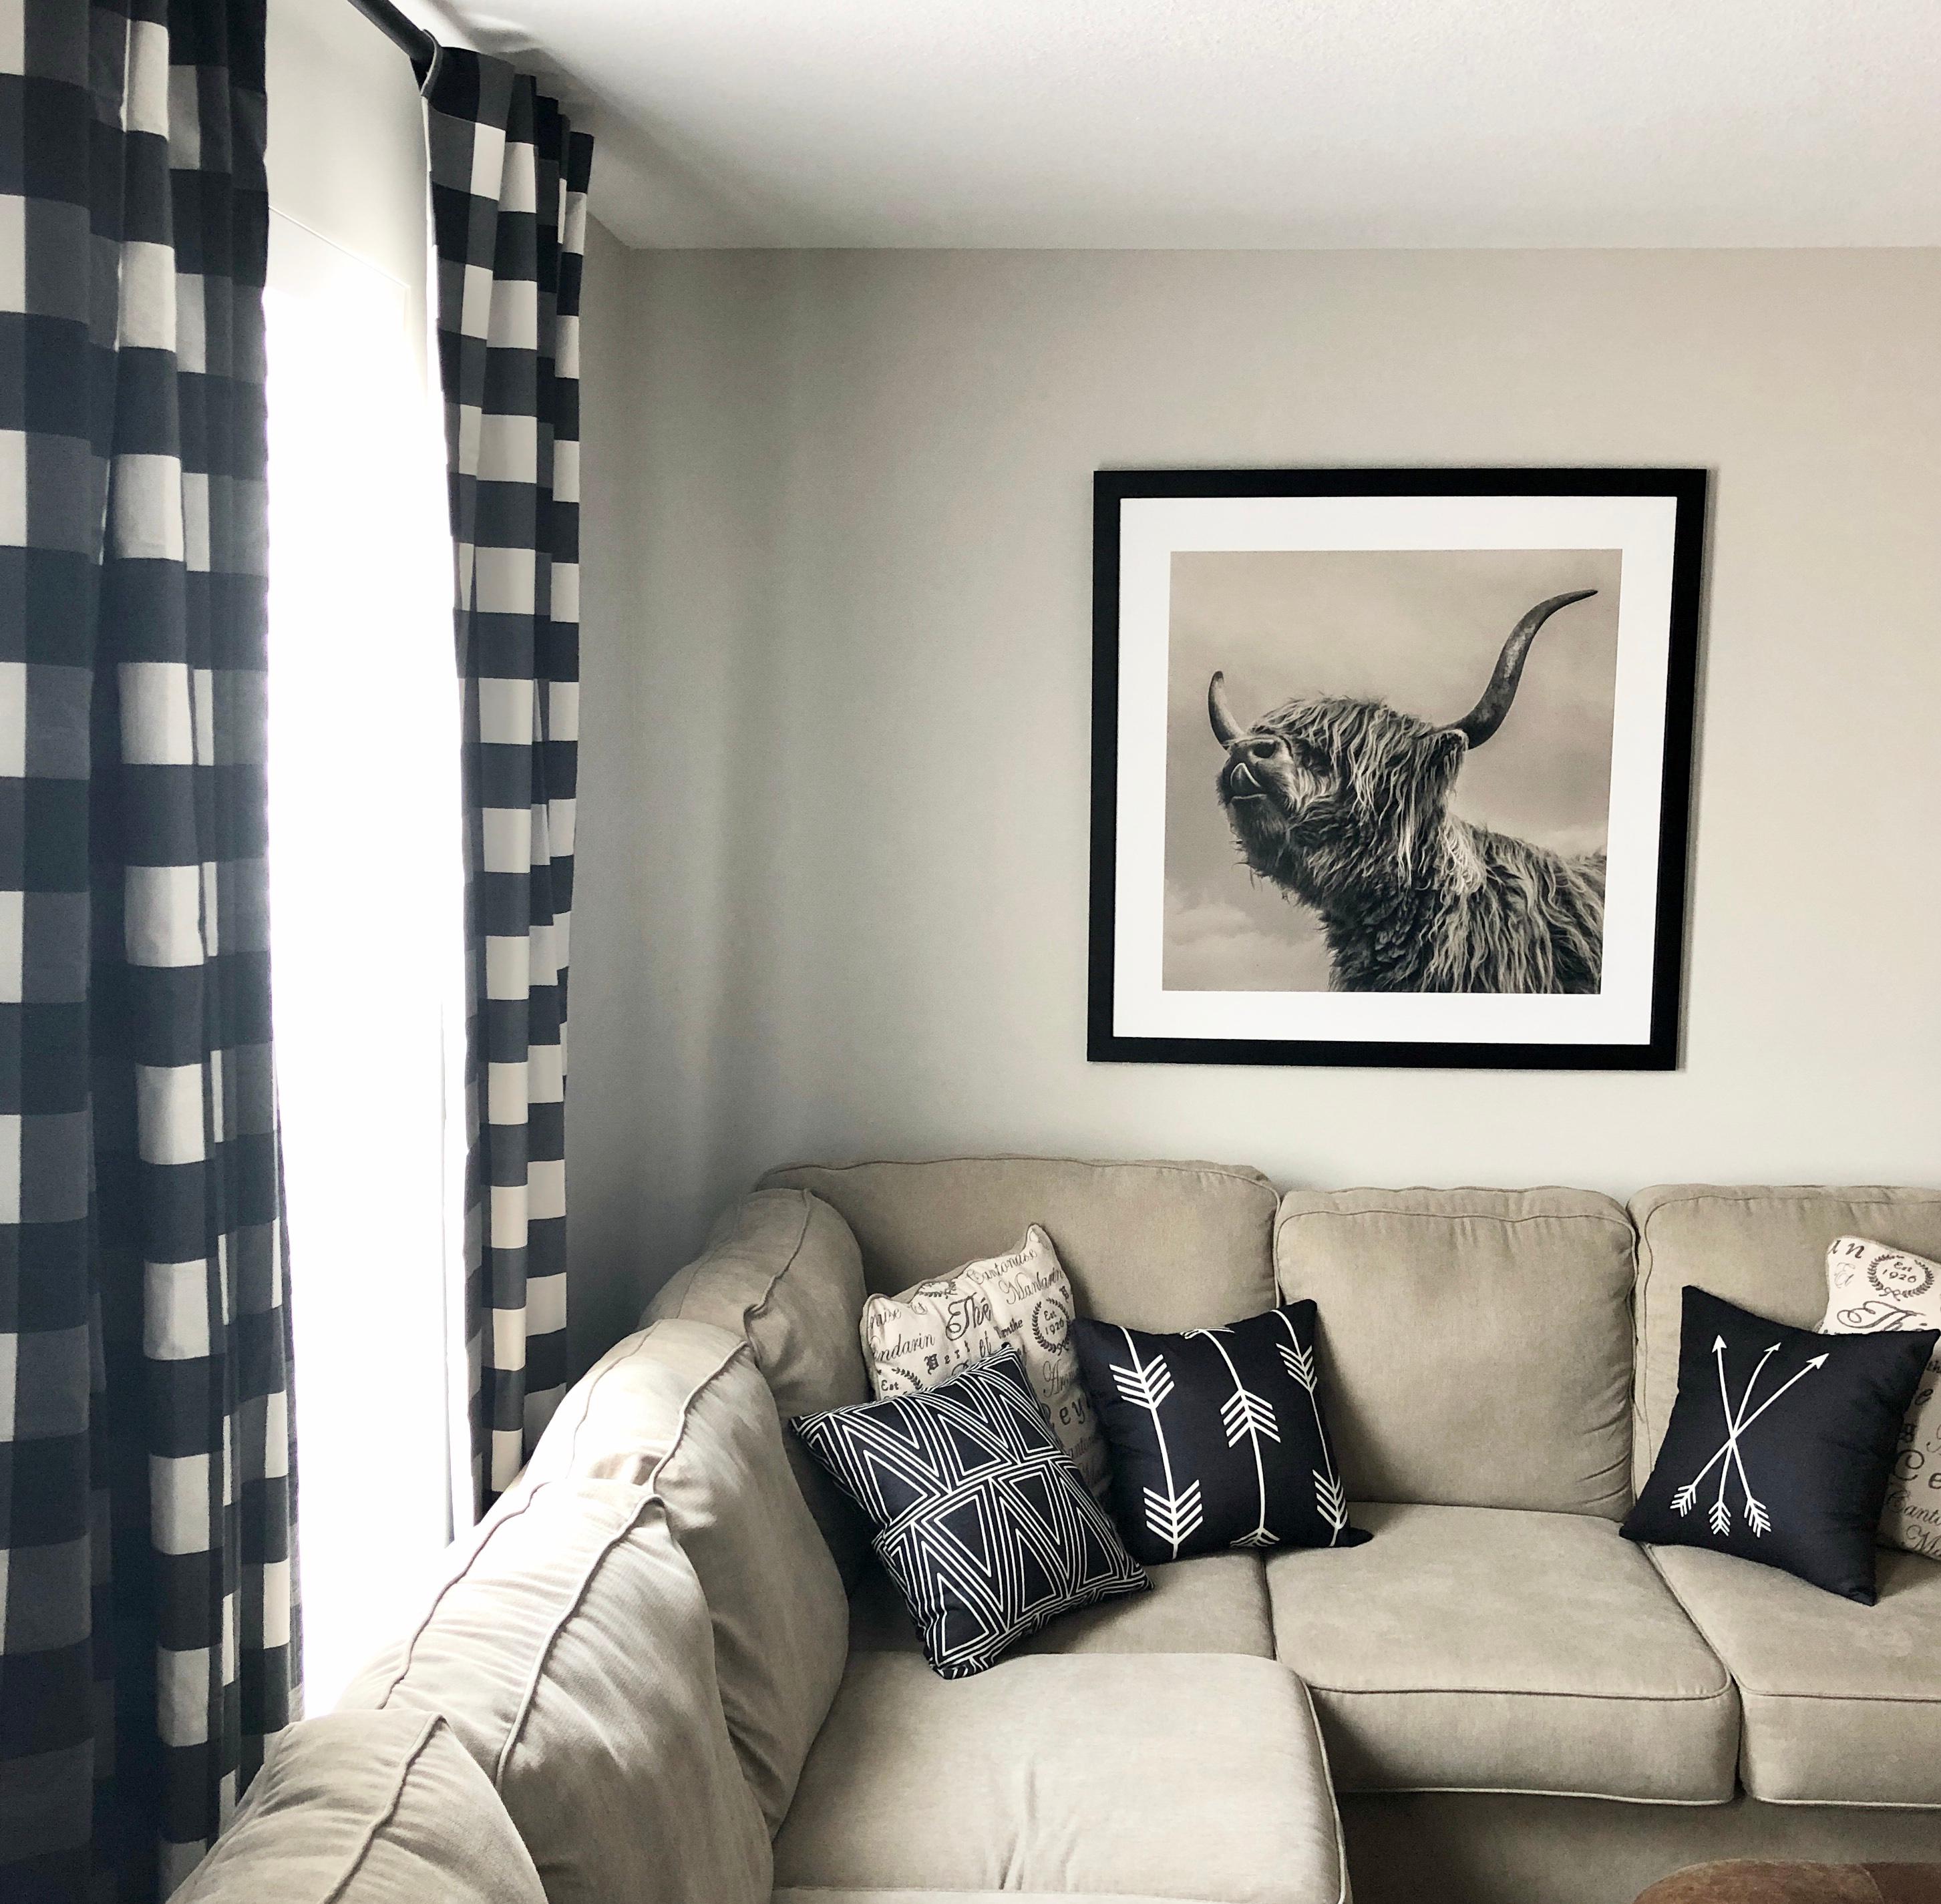 Our Victoria client selected these Buffalo Check drapery panels as part of the playful decor in their home's Loft space.